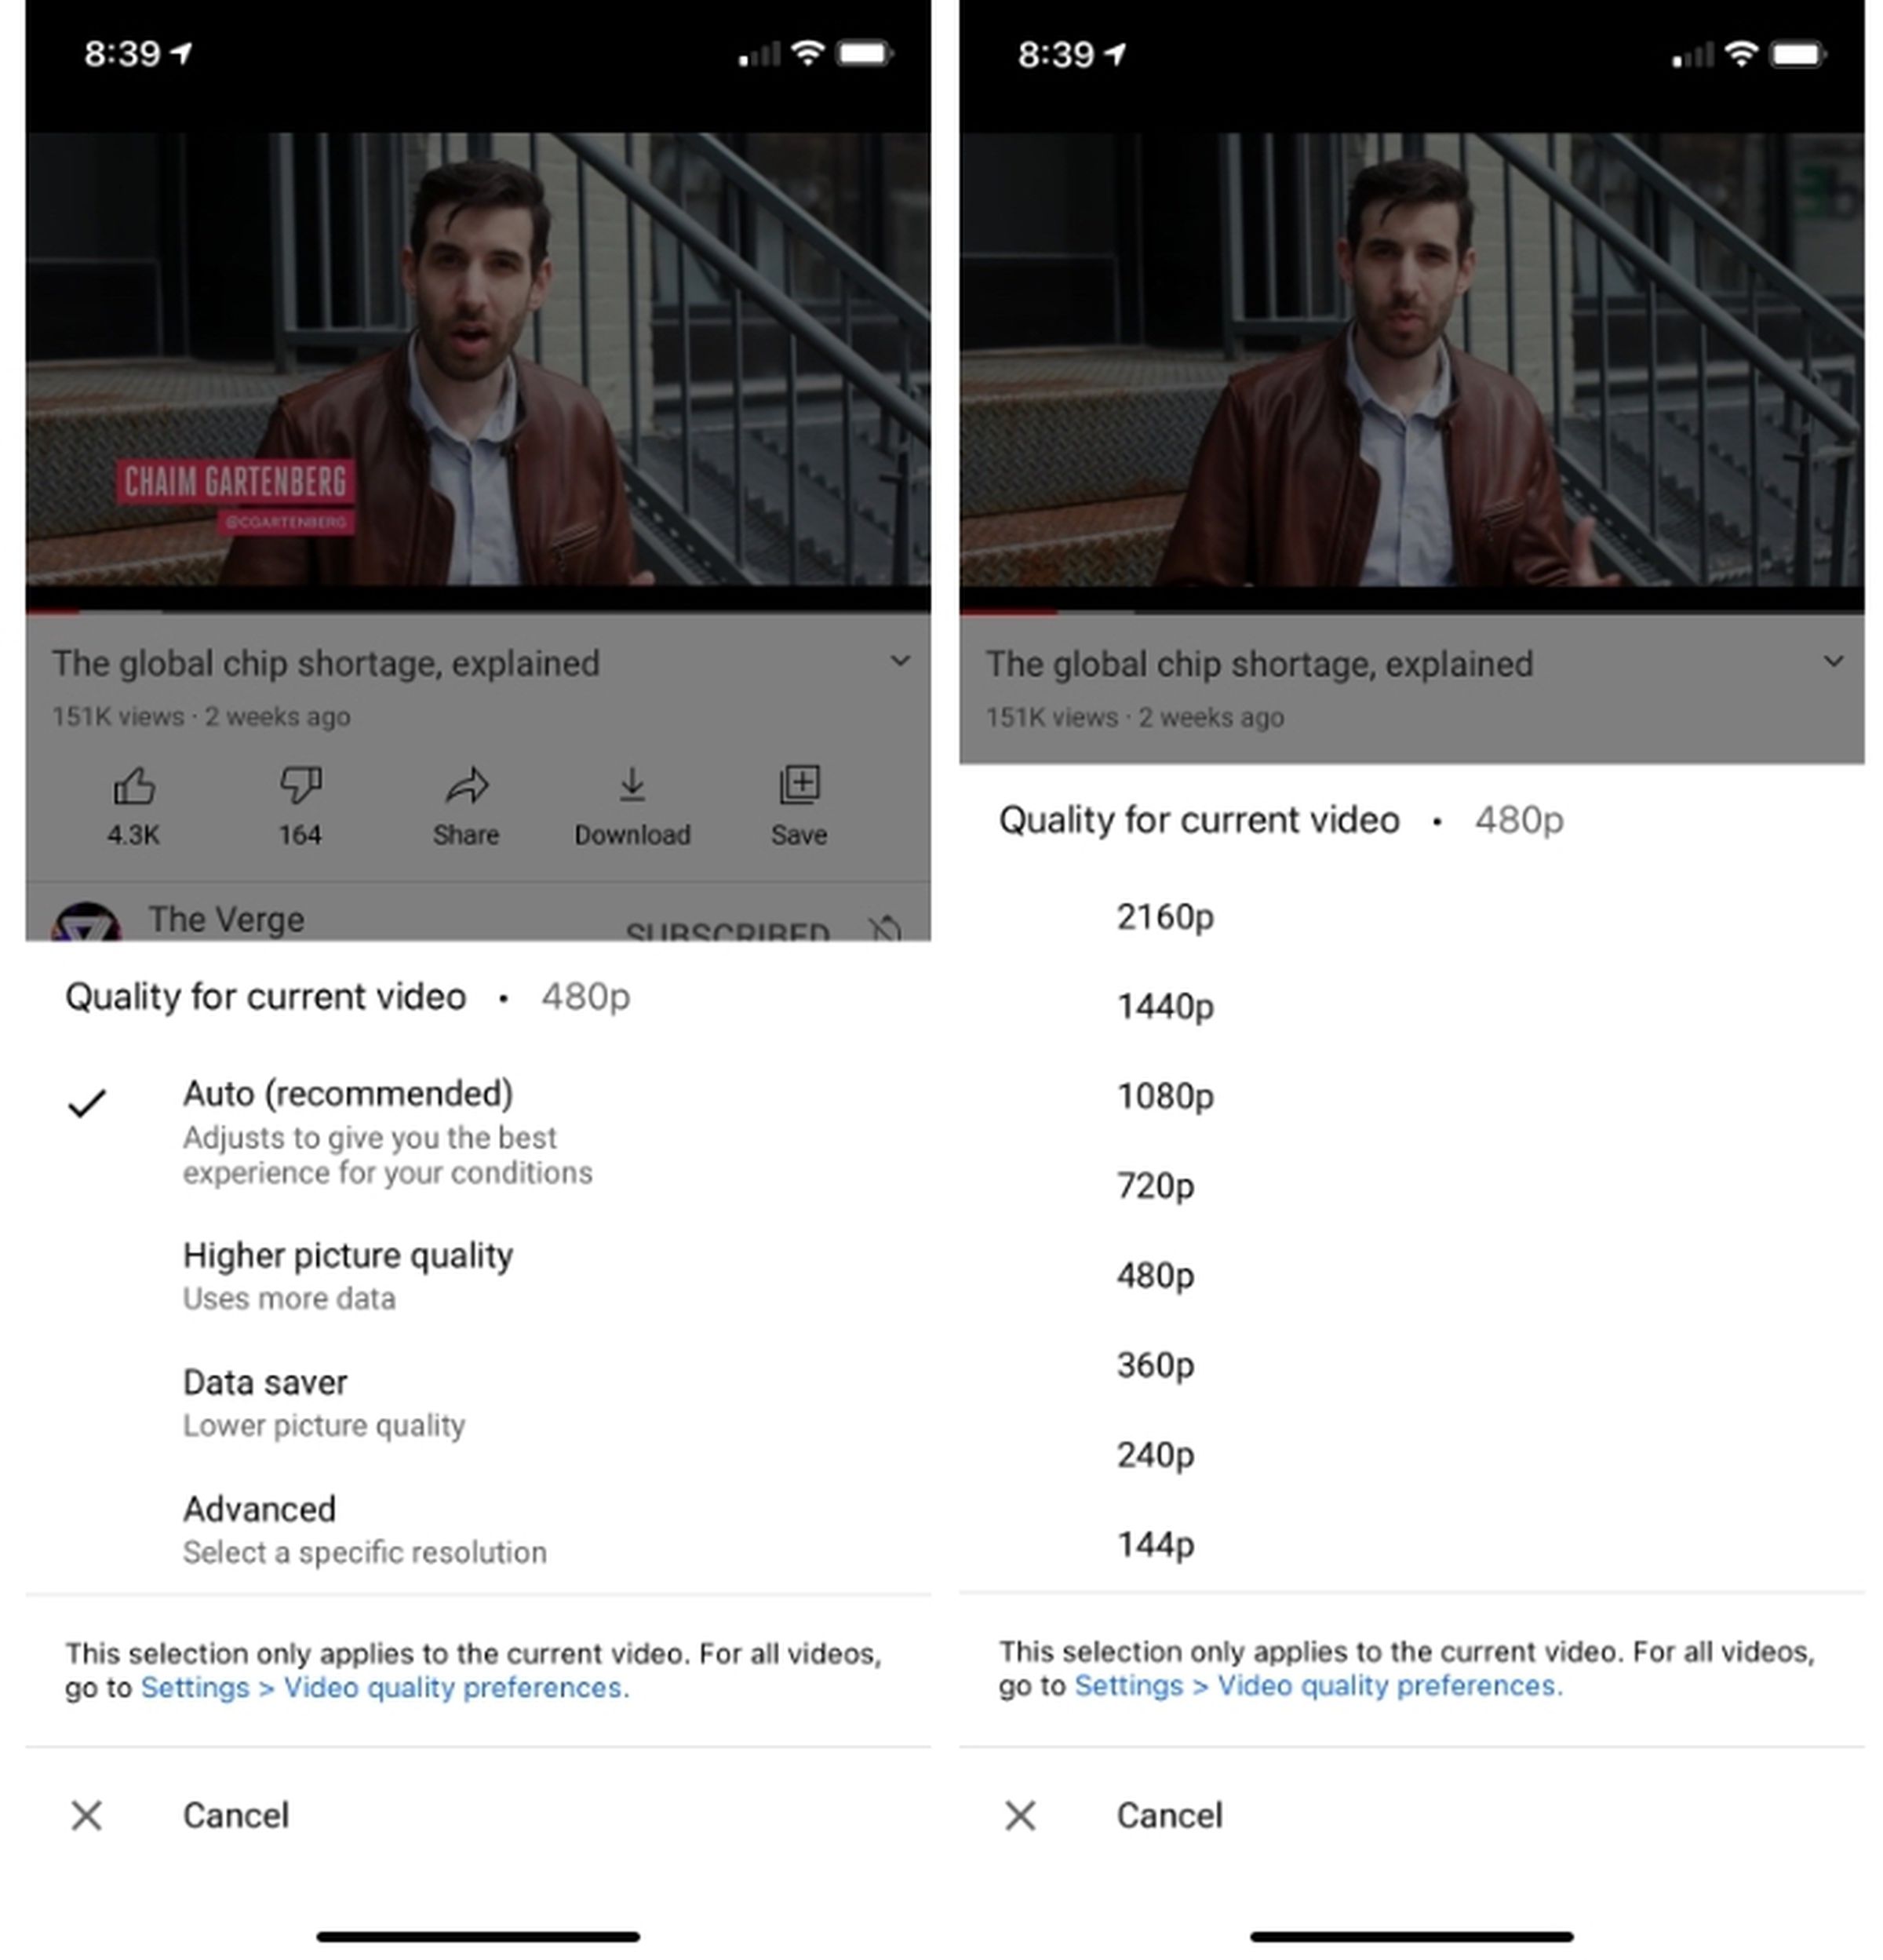 YouTube’s new video settings include options for “higher picture quality” and “data saver.”